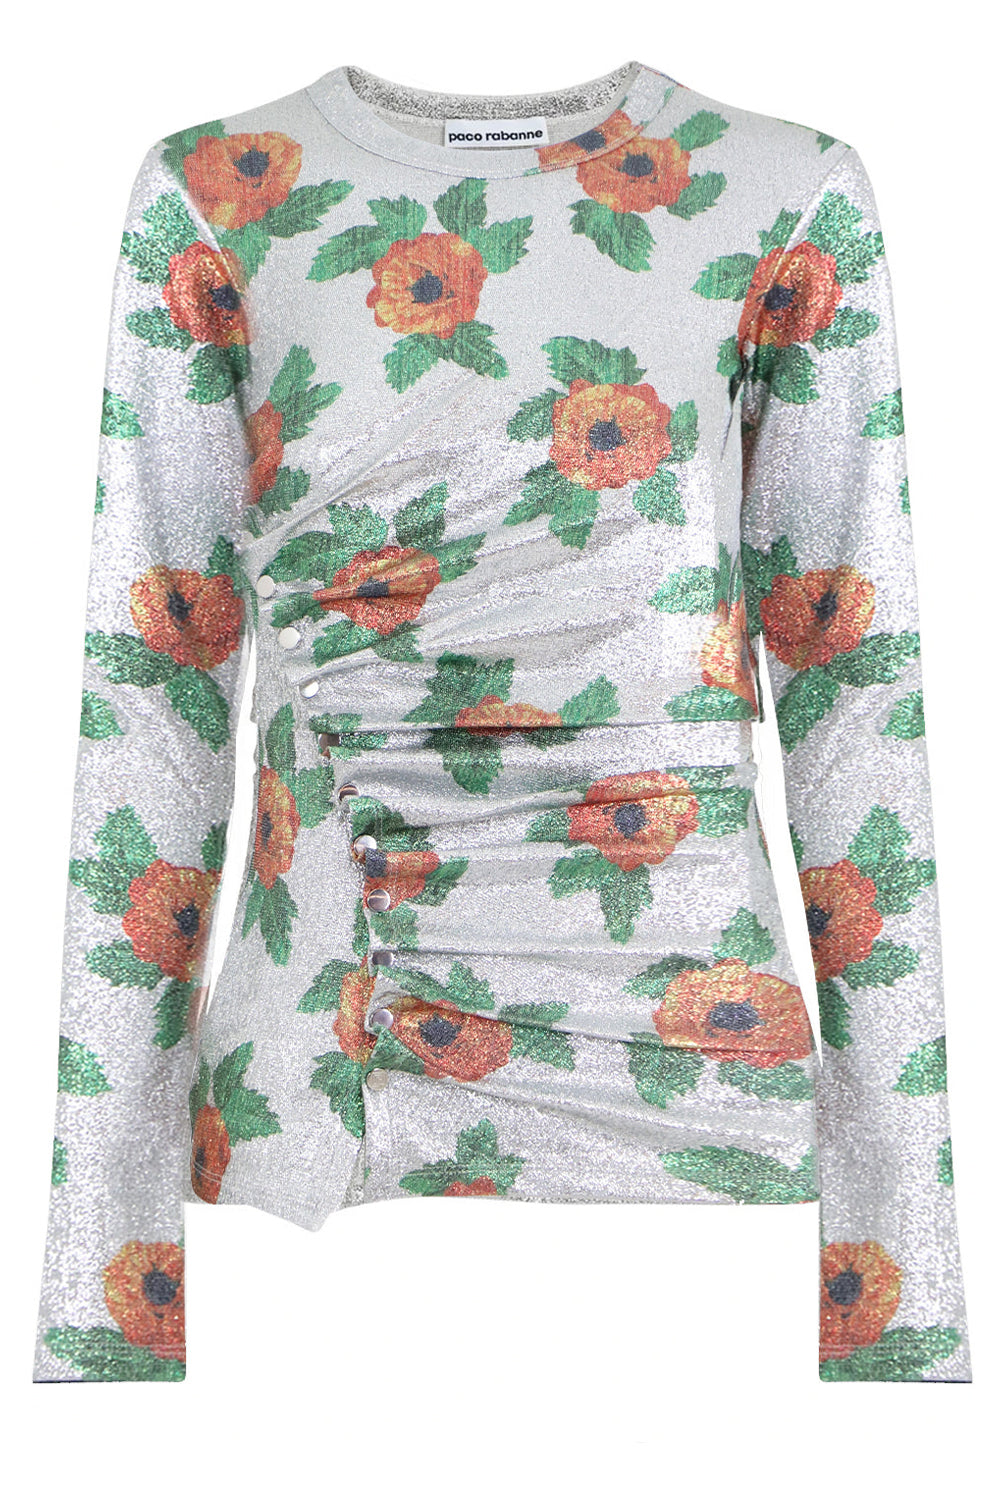 PACO RABANNE RTW FLORAL LUREX RUCHED L/S TOP SILVER